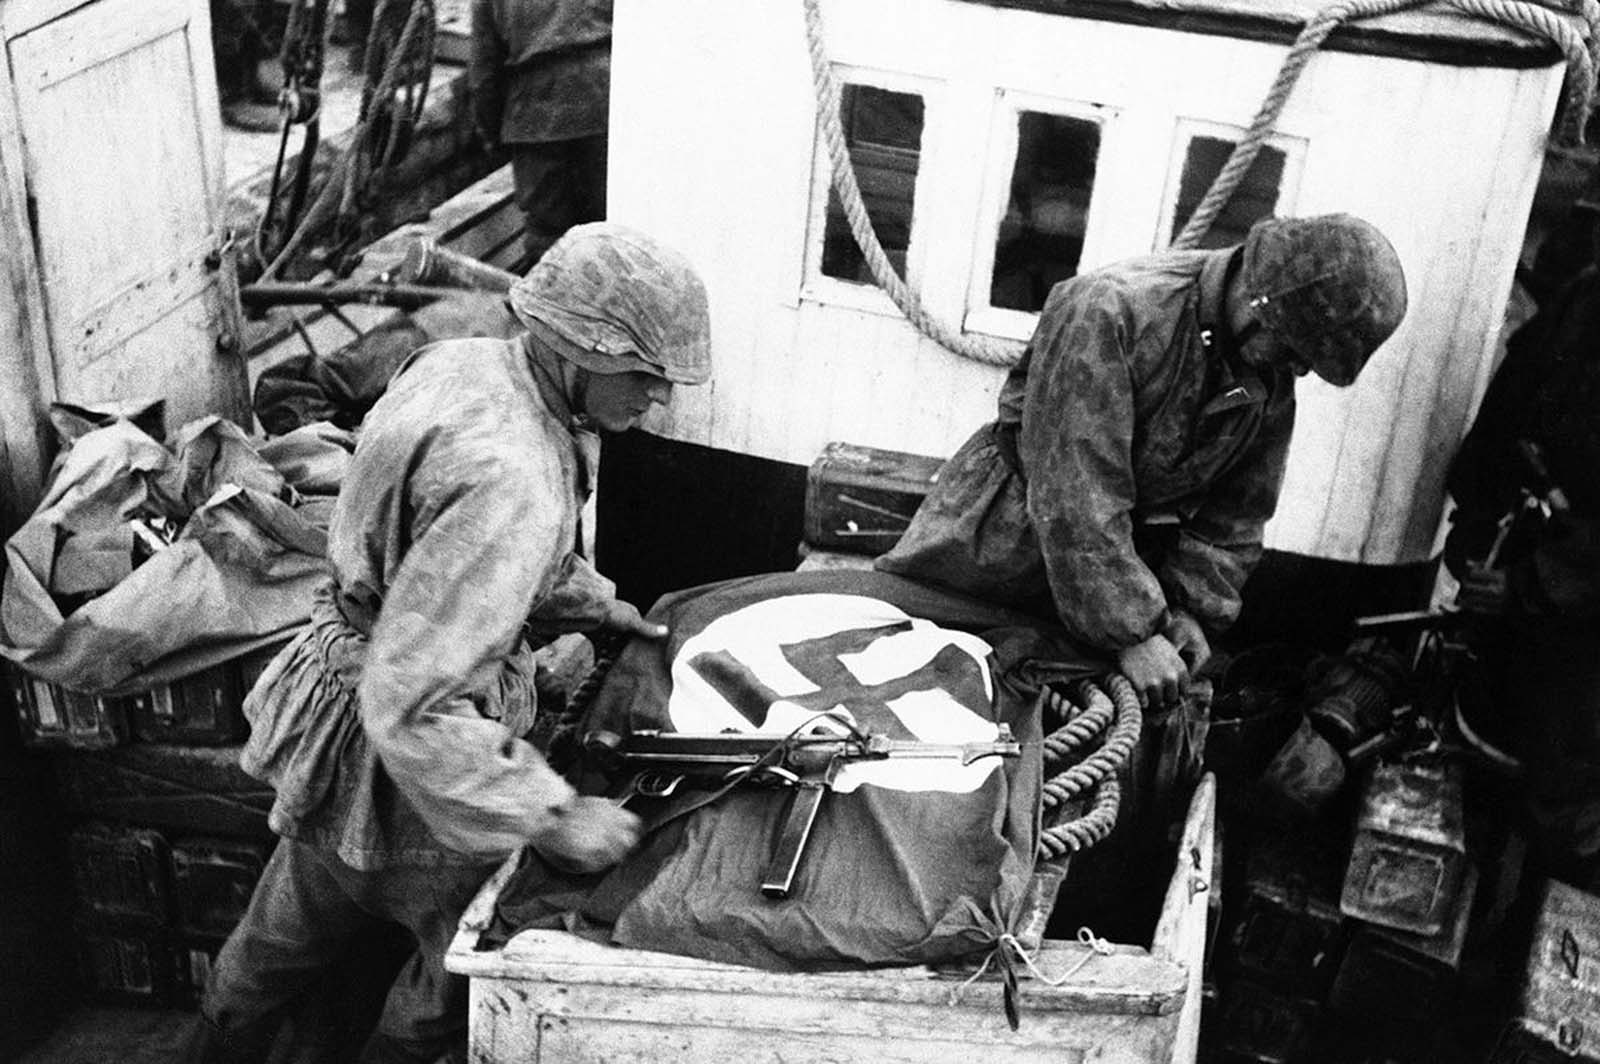 To alert their own airforce to their presence, soldiers spread the Swastika across boats used by the S.S. troops to cross the Gulf of Corinth, Greece, on May 23, 1941.